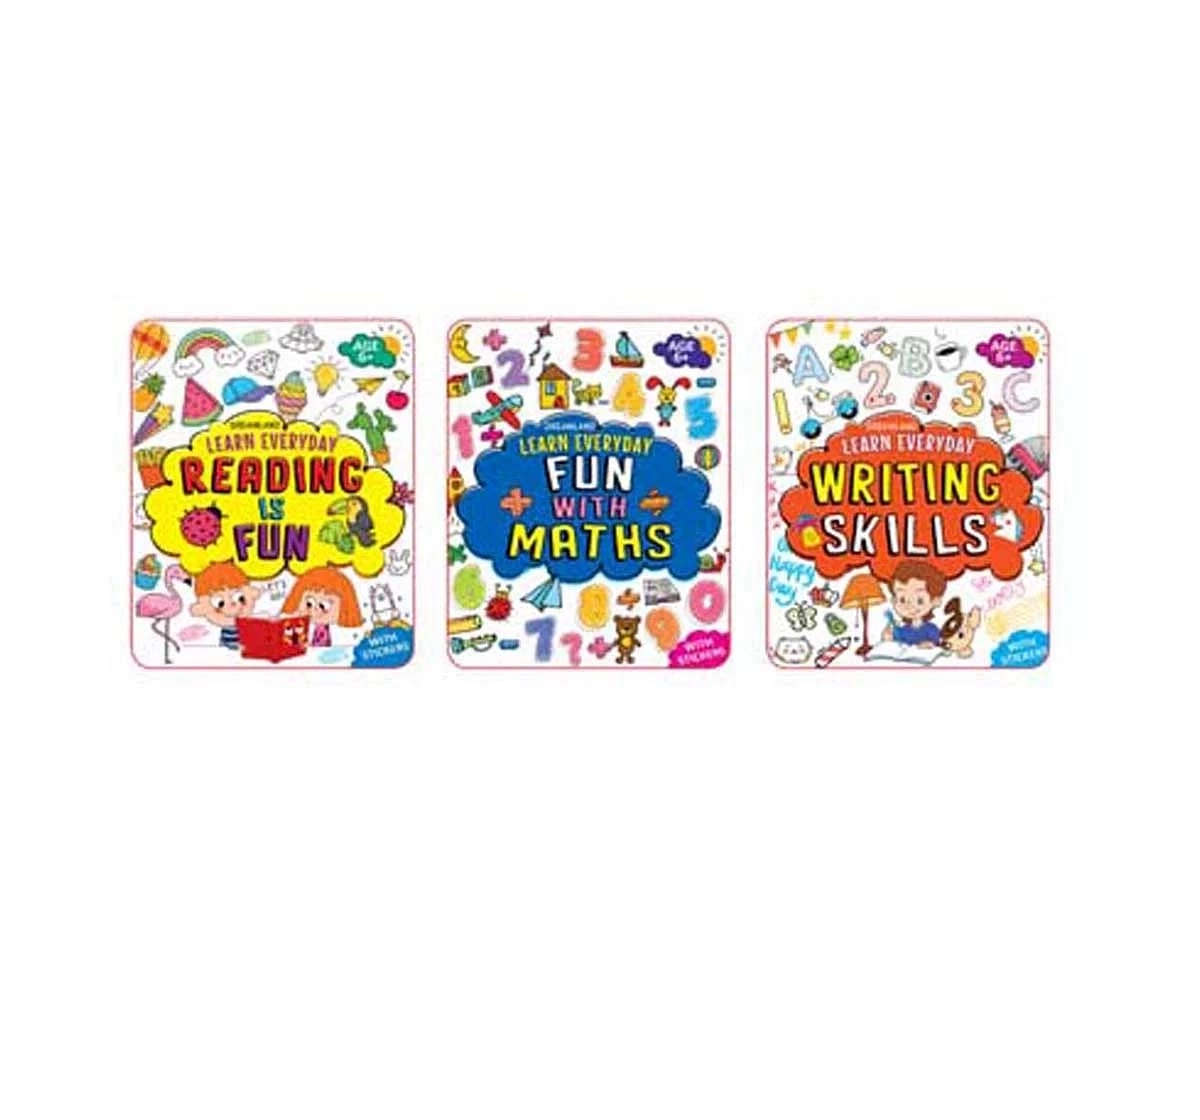 Dreamland Paper Back Learn Everyday 3 Books Pack for kids 6Y+, Multicolour